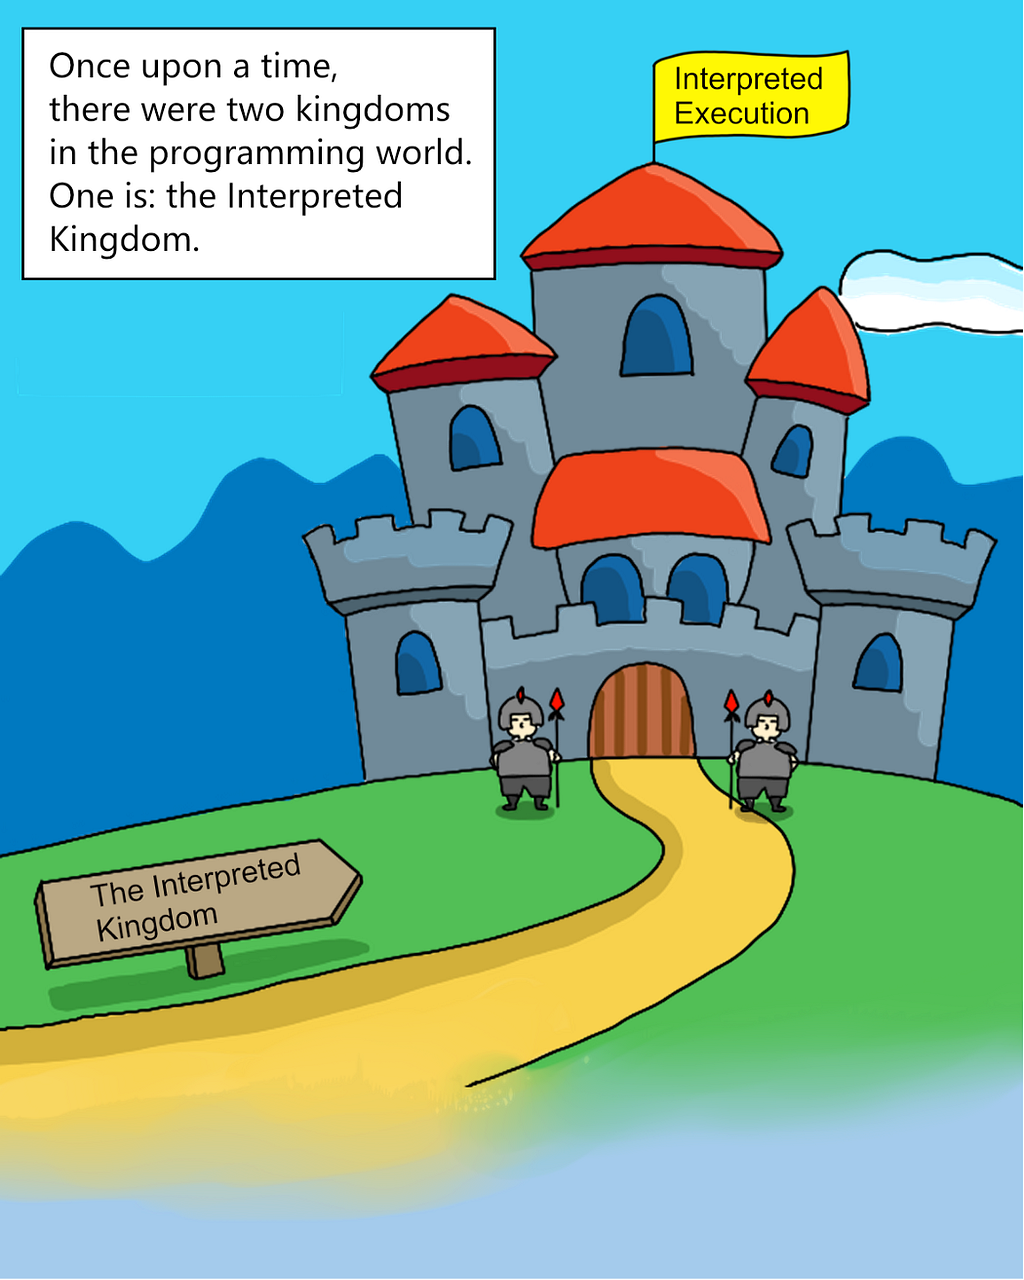 Once upon a time, there were two kingdoms in the programming world. One is: the Interpreted Kingdom.